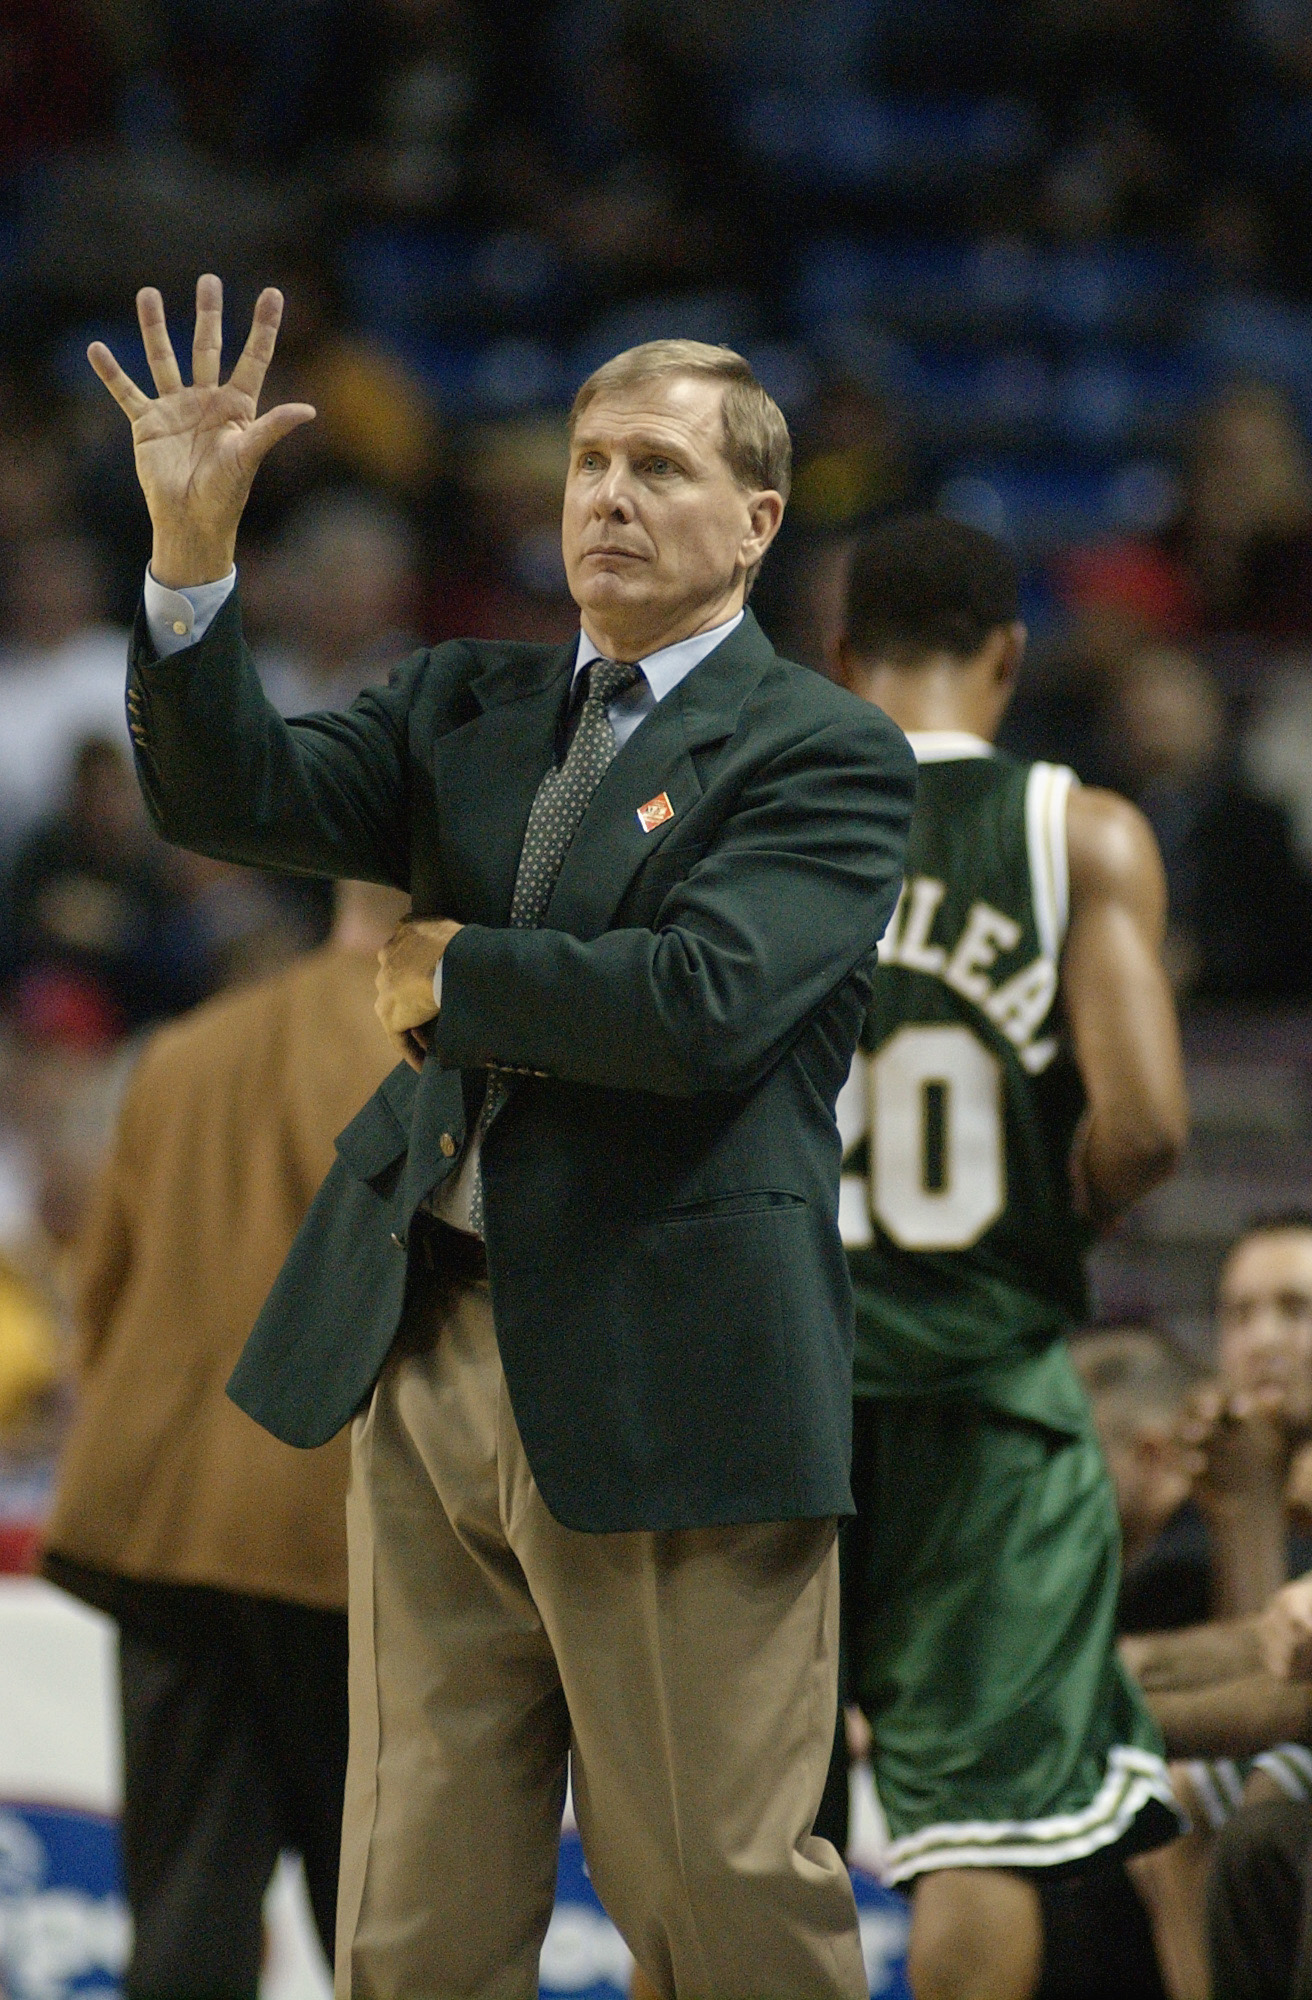 KANSAS CITY, MO - MARCH 7:  Head Coach Dave Bliss of the Baylor Bears signals to his team against the Kansas State Wildcats during the Big 12 first round game at Kemper Arena in Kansas City, Missouri on March 7, 2002.  Kansas State edged Baylor 74-73.  (P